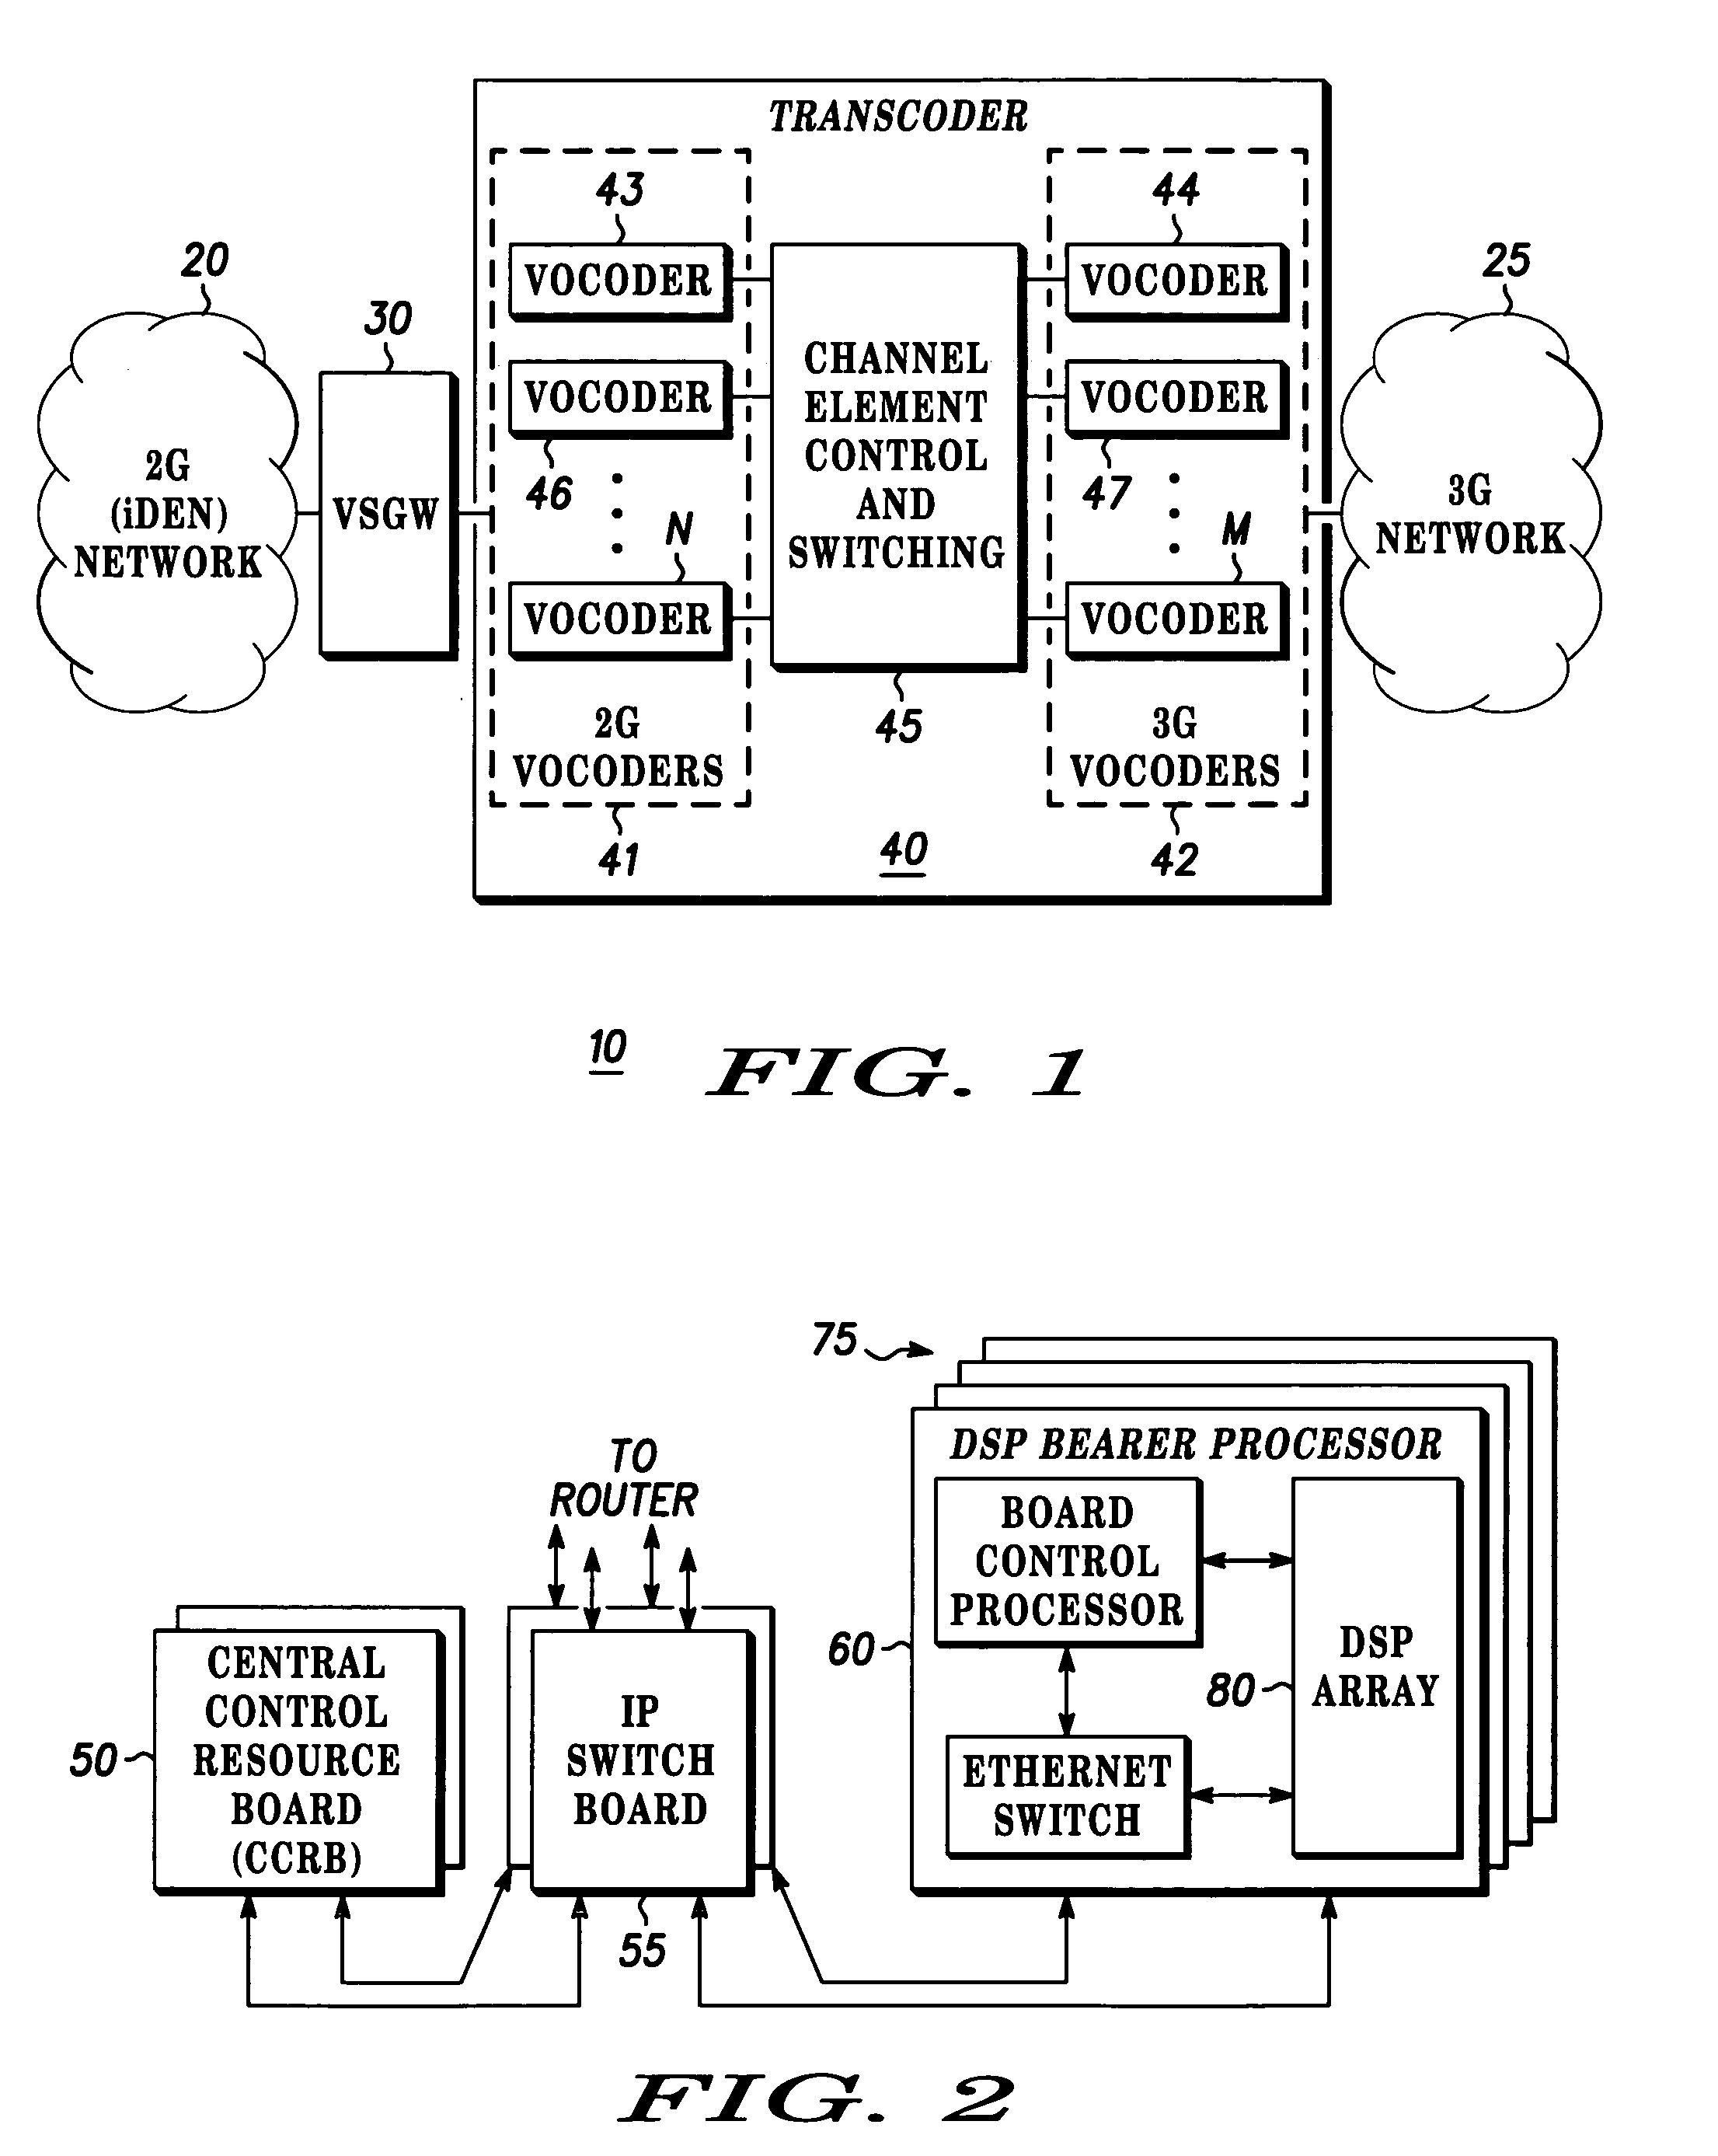 Method for assigning transcoding channel elements